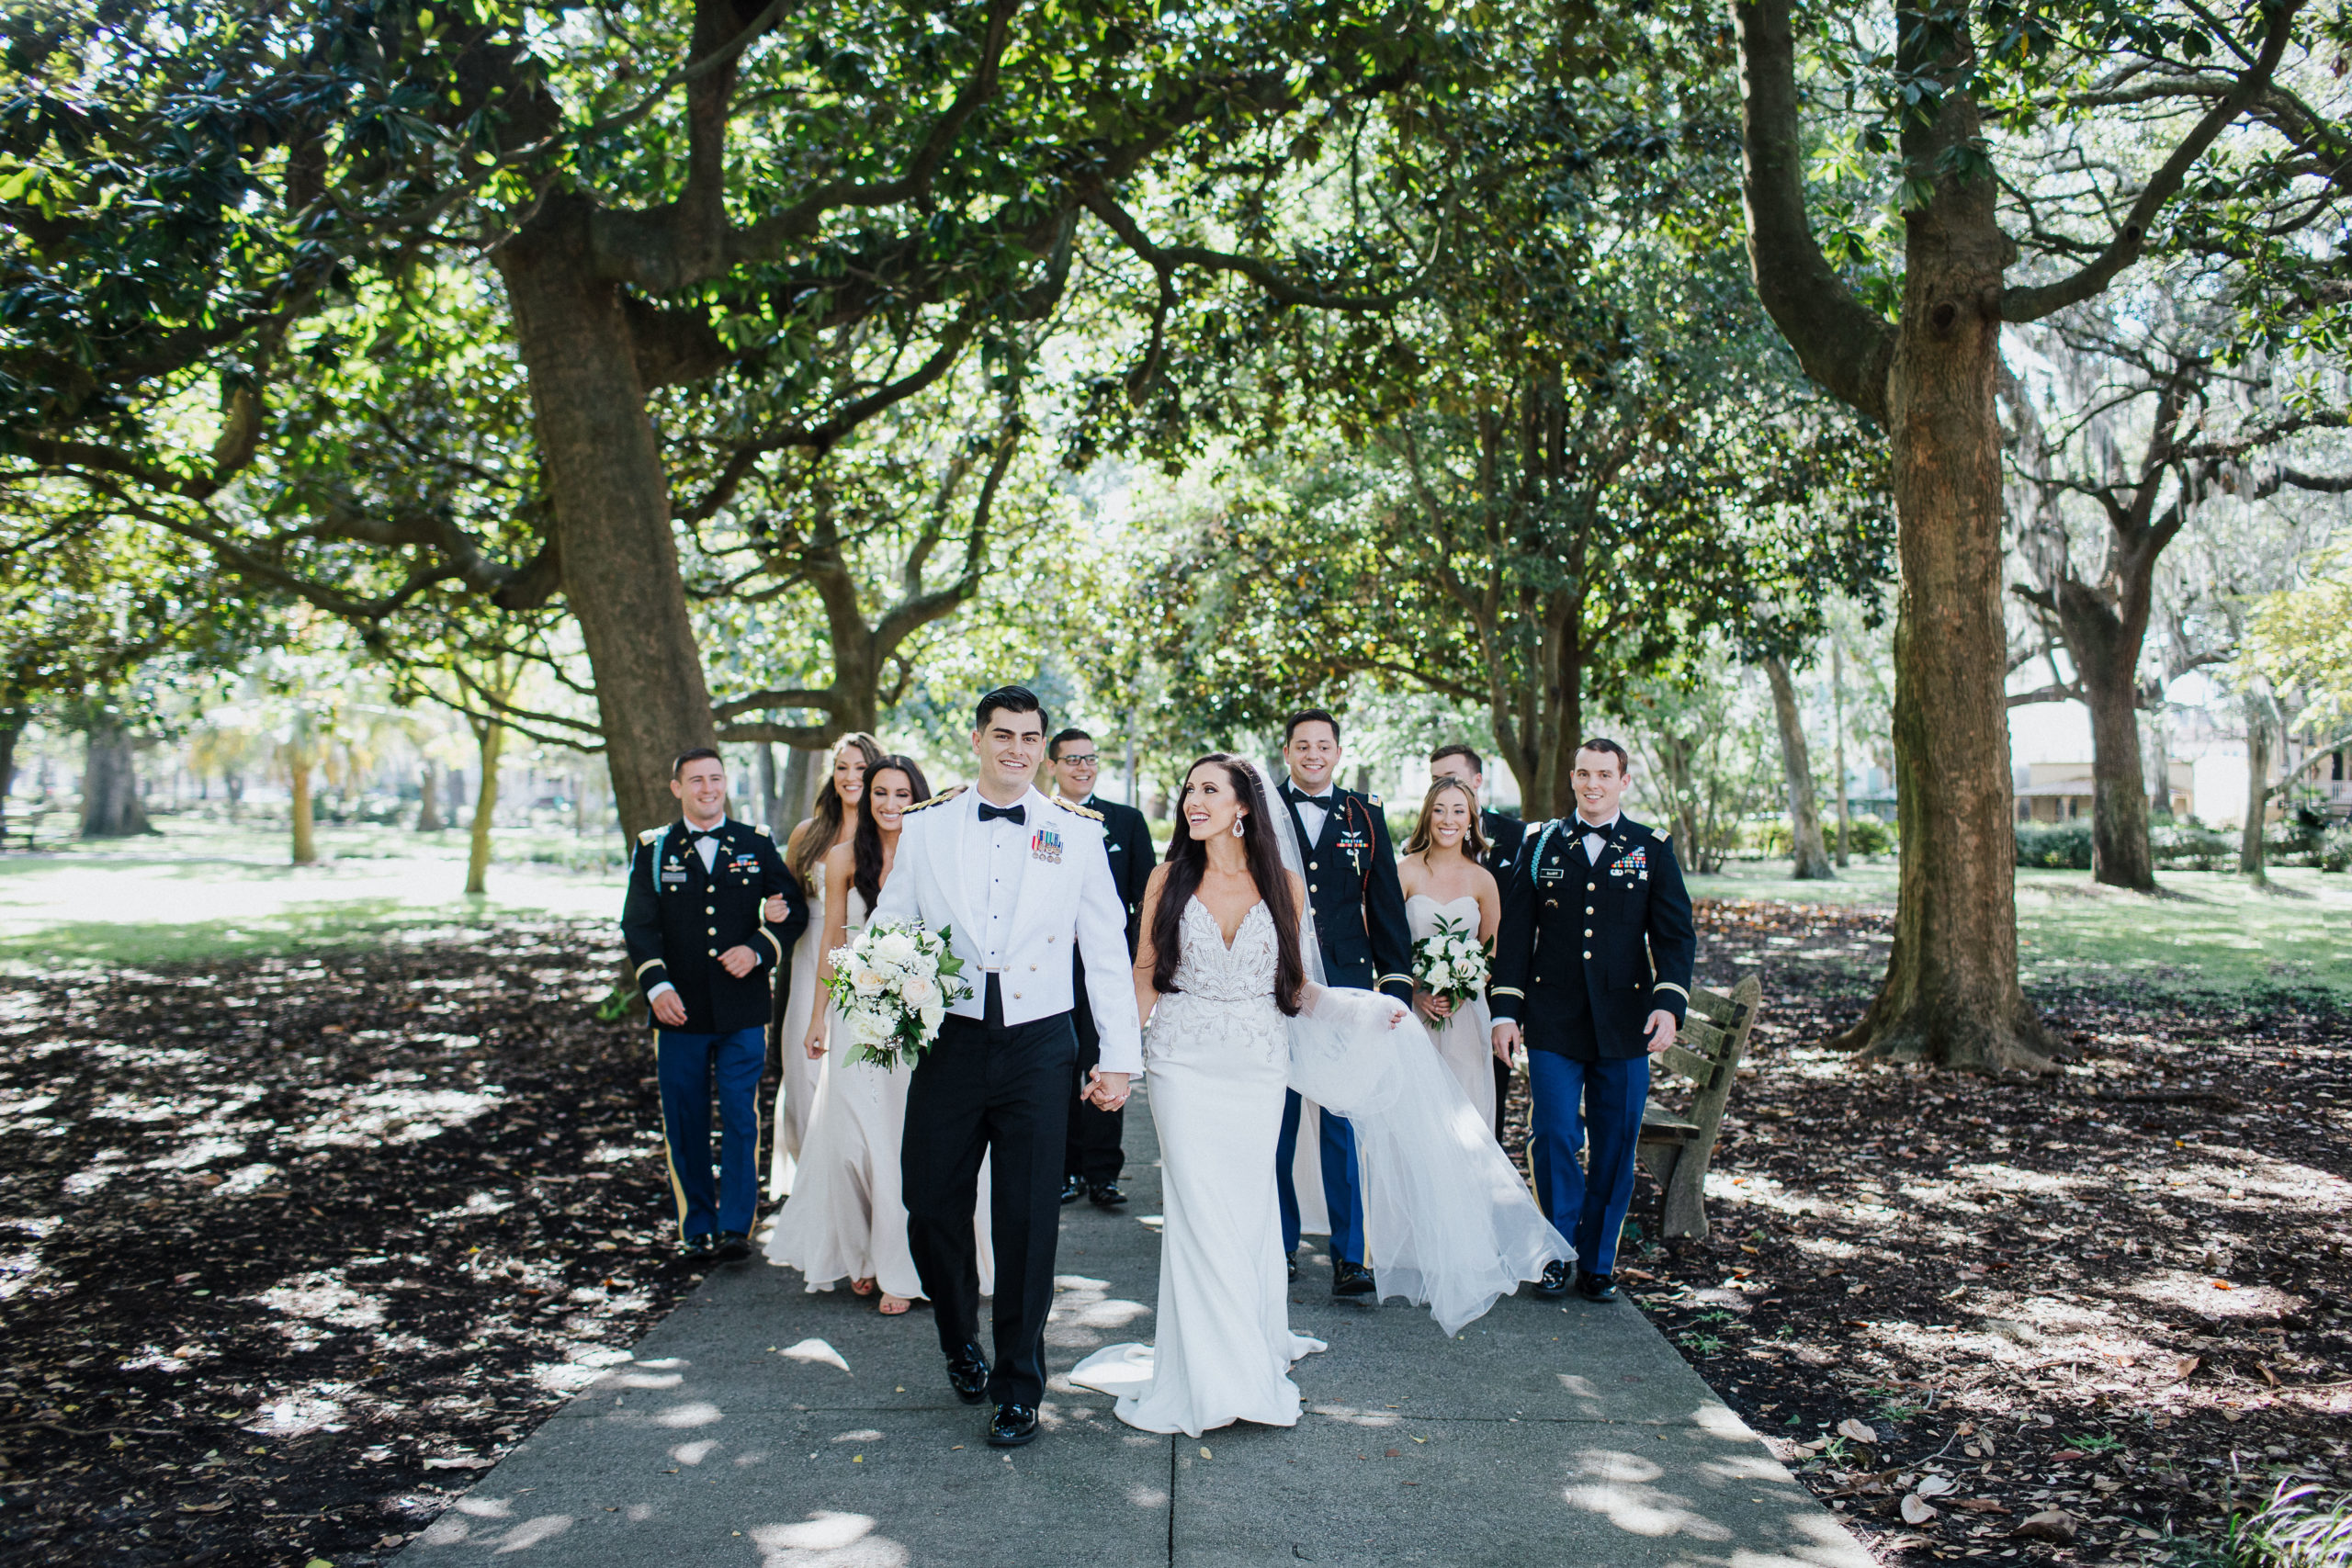 Carly and Collin’s Fall wedding in Historic Savannah | Izzy and Co.